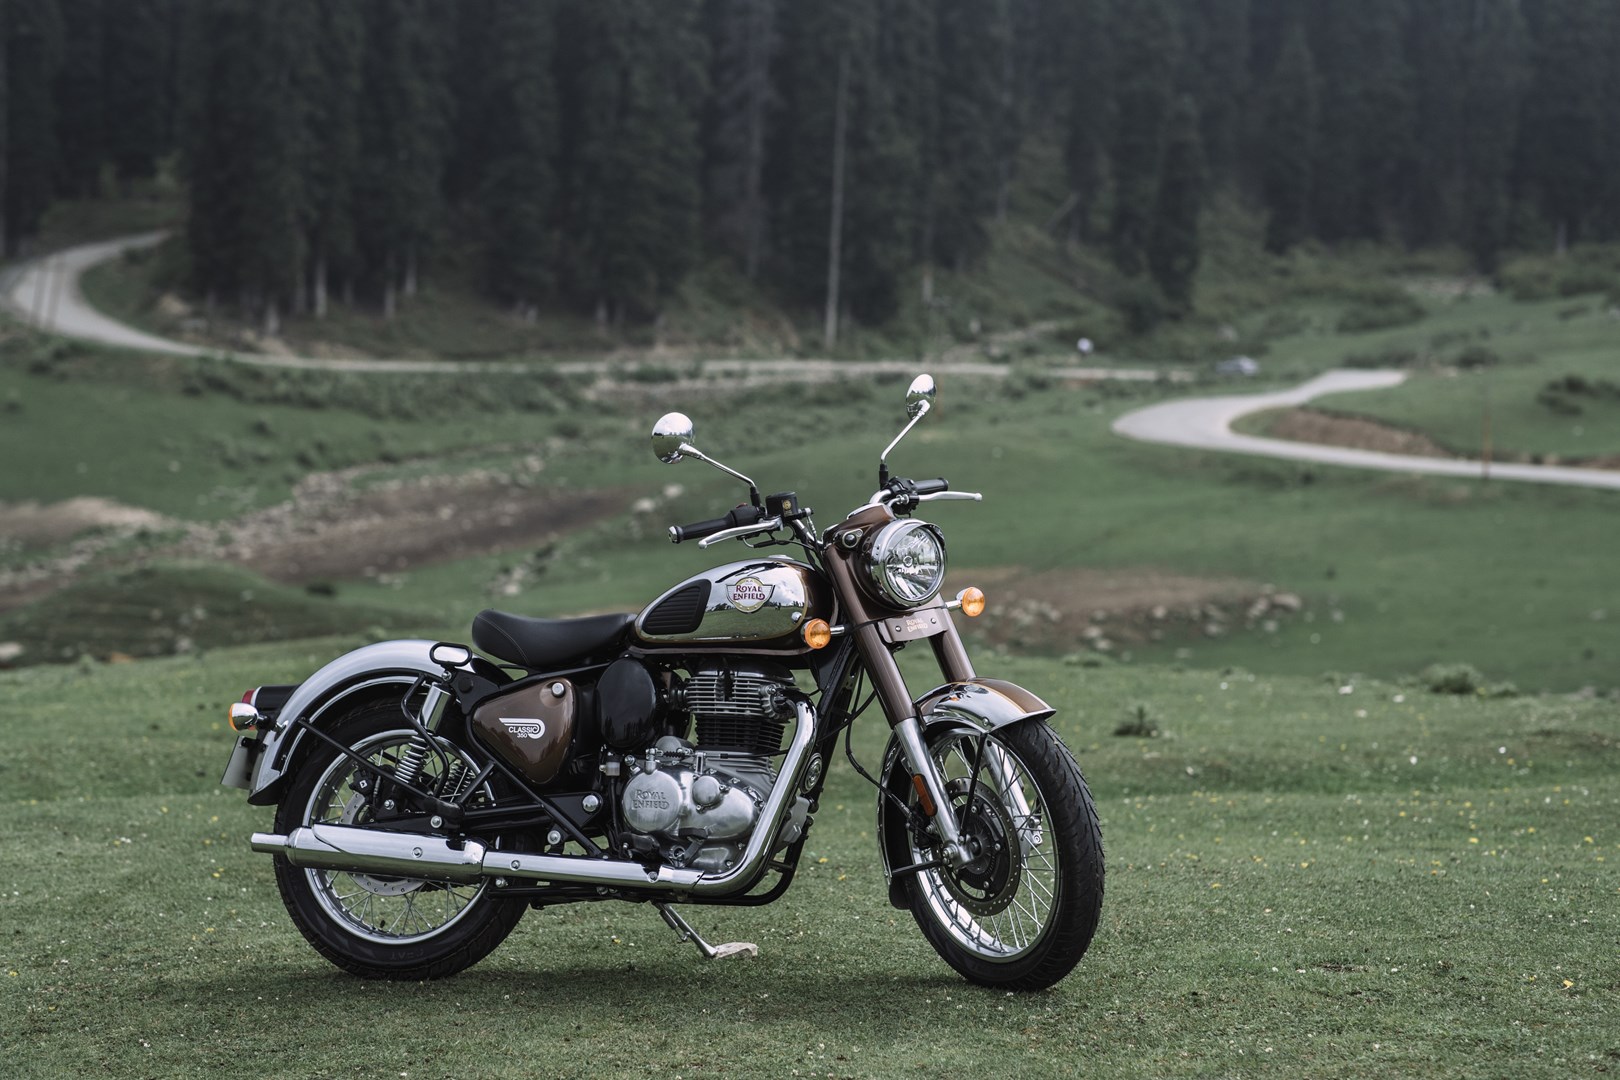 2021 Royal Enfield 350 launched: Thump is back - Motoring World